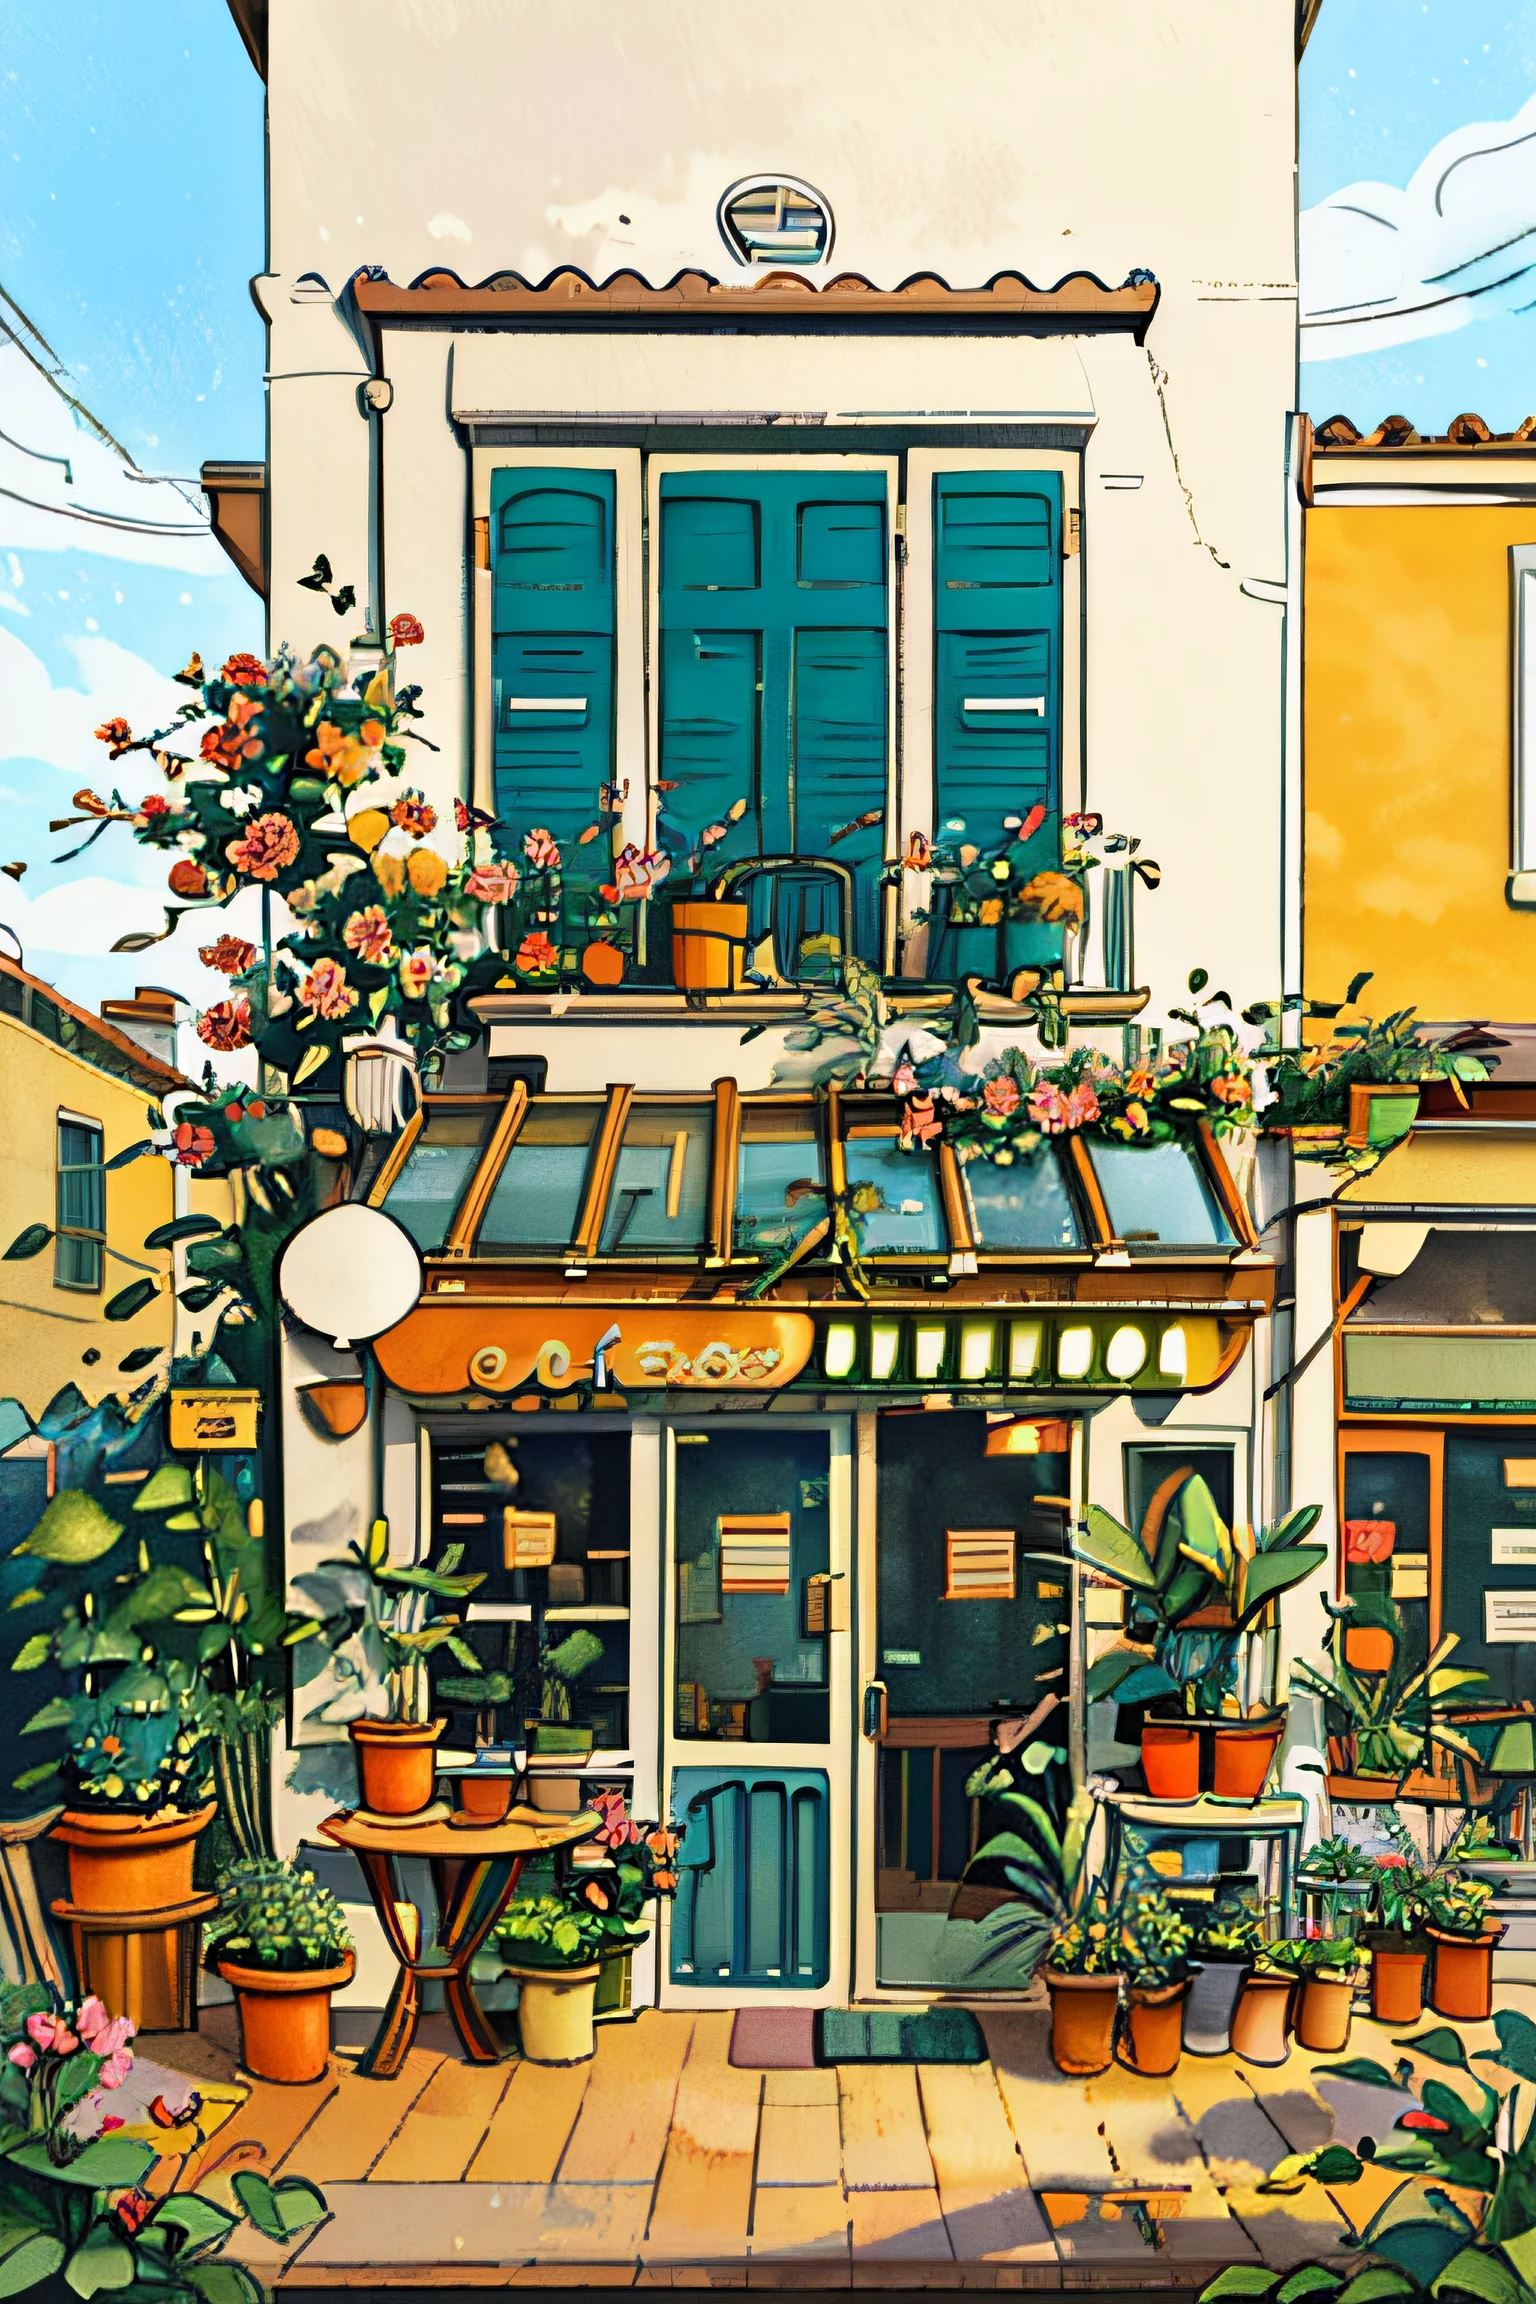 JZCG021,Flower store,coffee spot,tables,chairs,no one,windows,flowers,plants,potted plants,watercolor (medium),landscapes,doors,air conditioning,paintings (medium),traditional media,houses,outdoors,balconies,architecture,masterpiece,best quality,high quality,Botanical,, masterpiece,best quality,high quality,